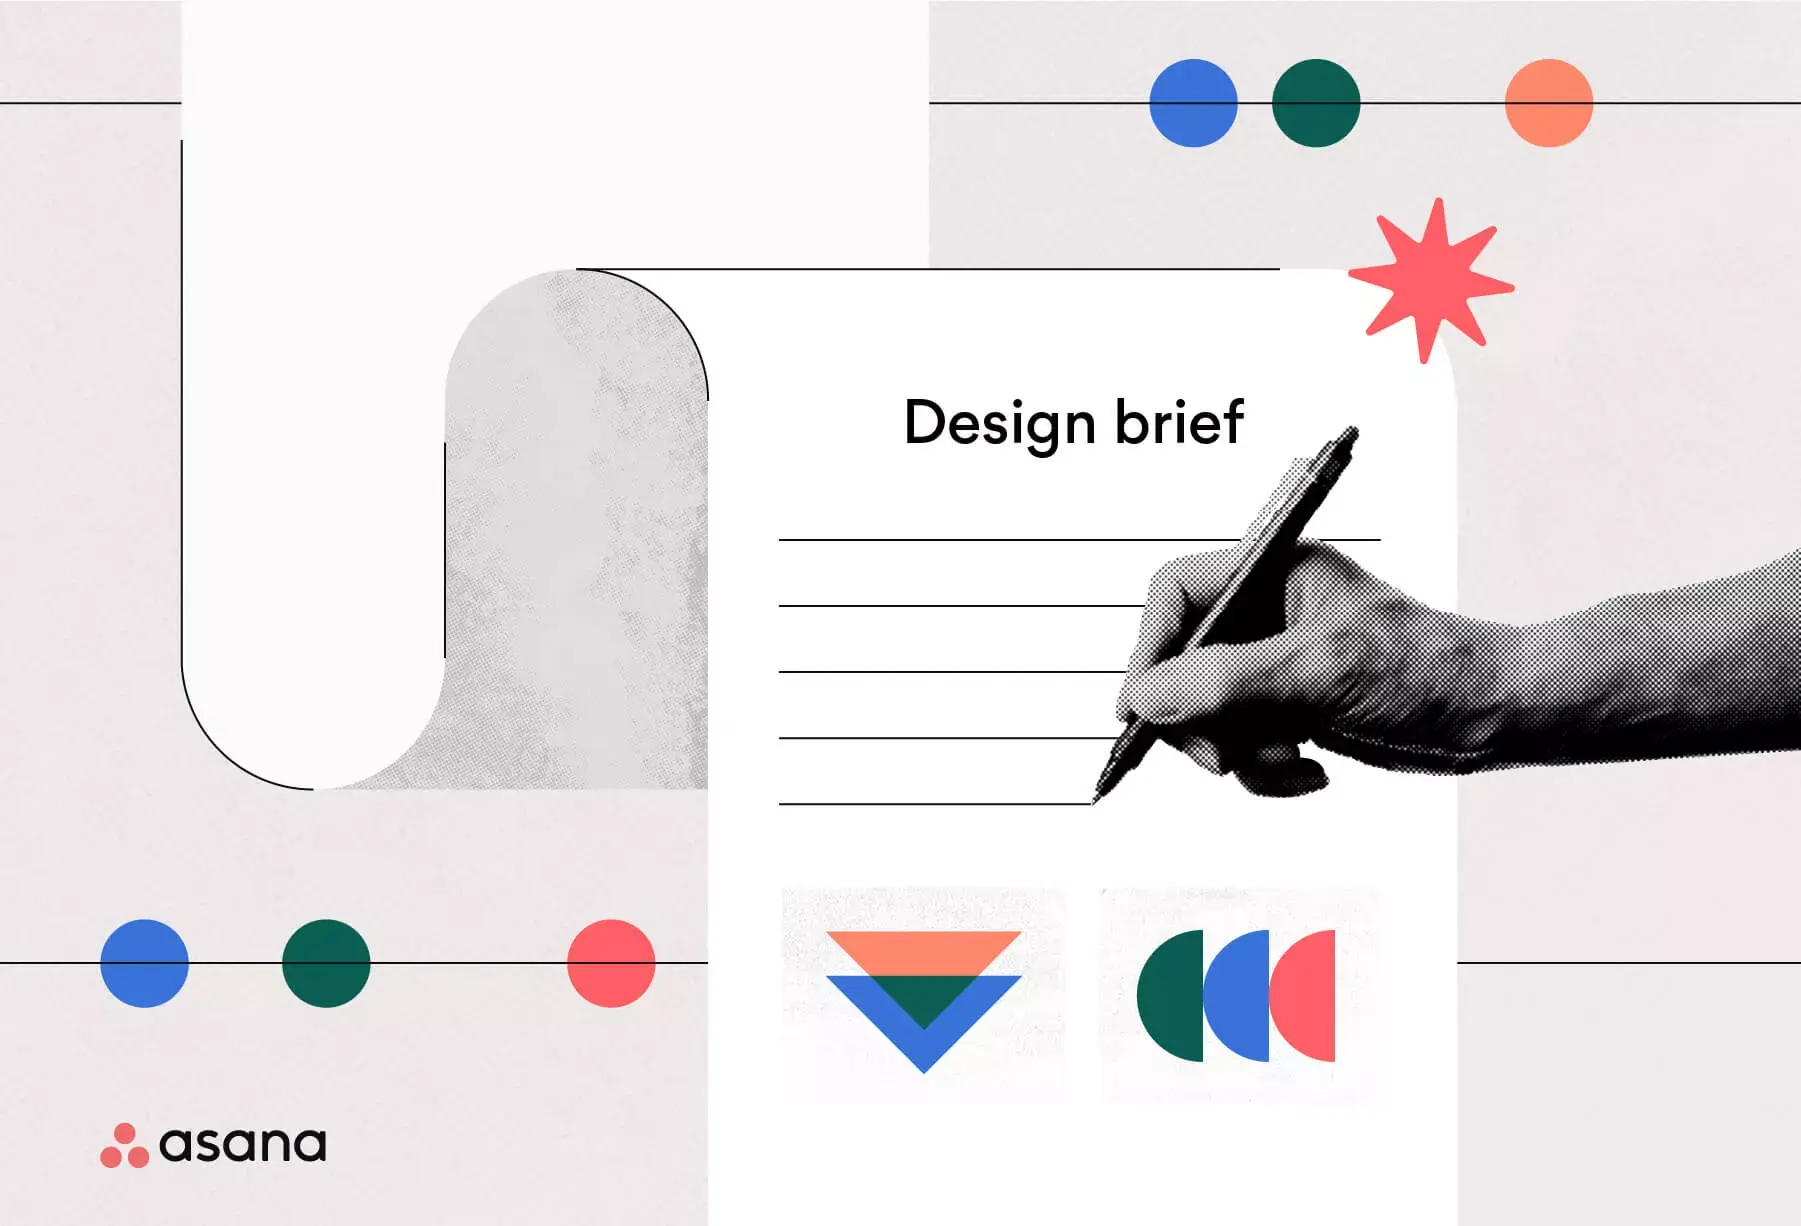 [inline illustration] what is a design brief (abstract)